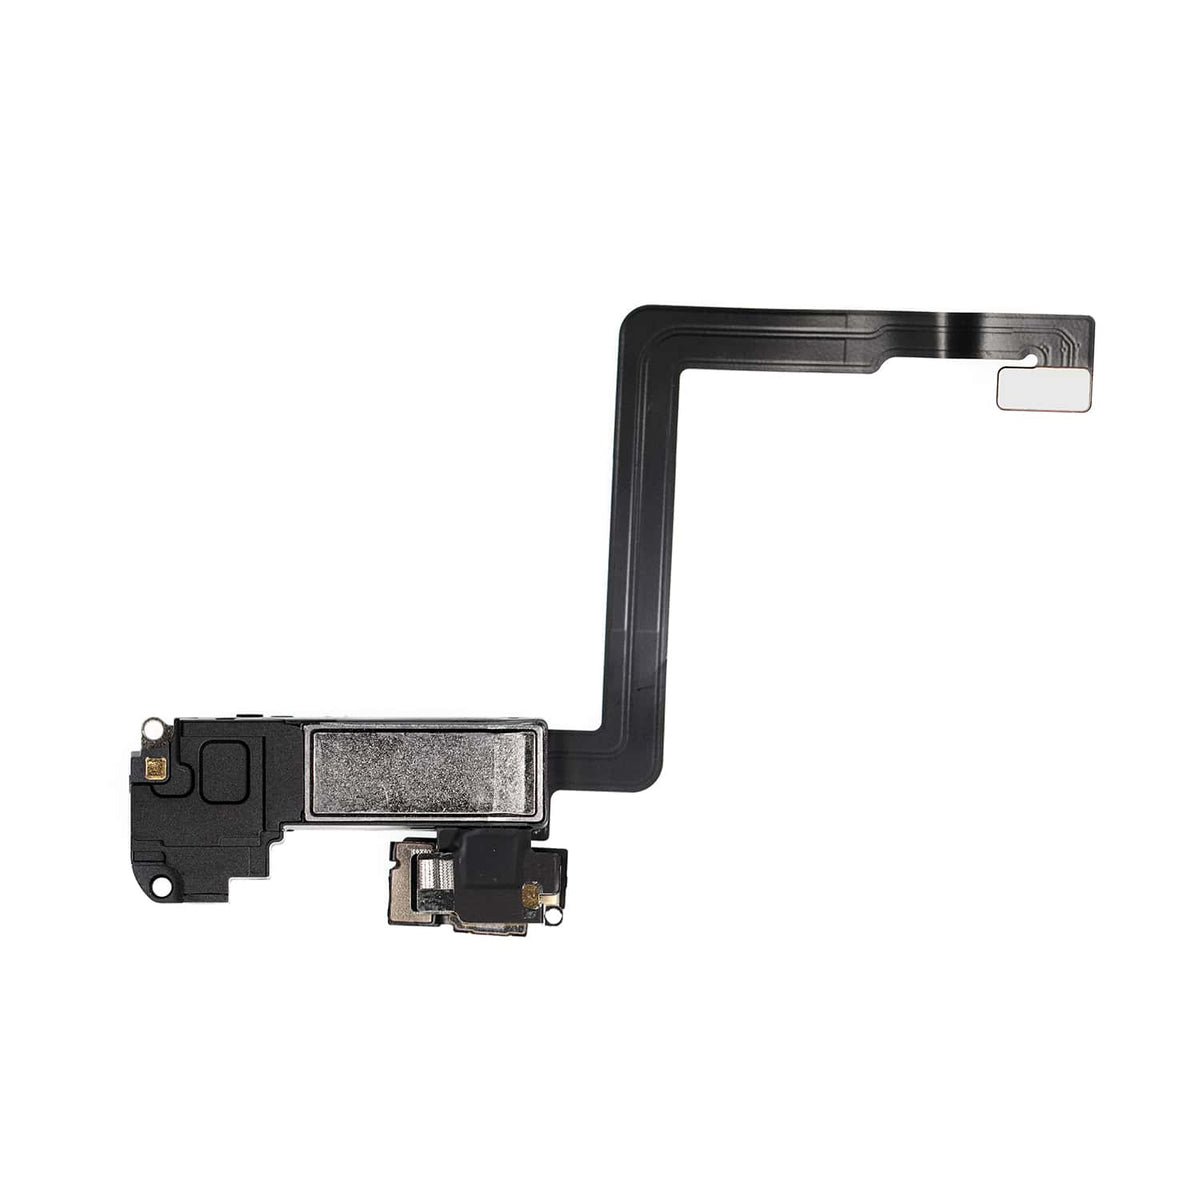 AMBIENT LIGHT SENSOR WITH EAR SPEAKER ASSEMBLY FOR IPHONE 11 PRO